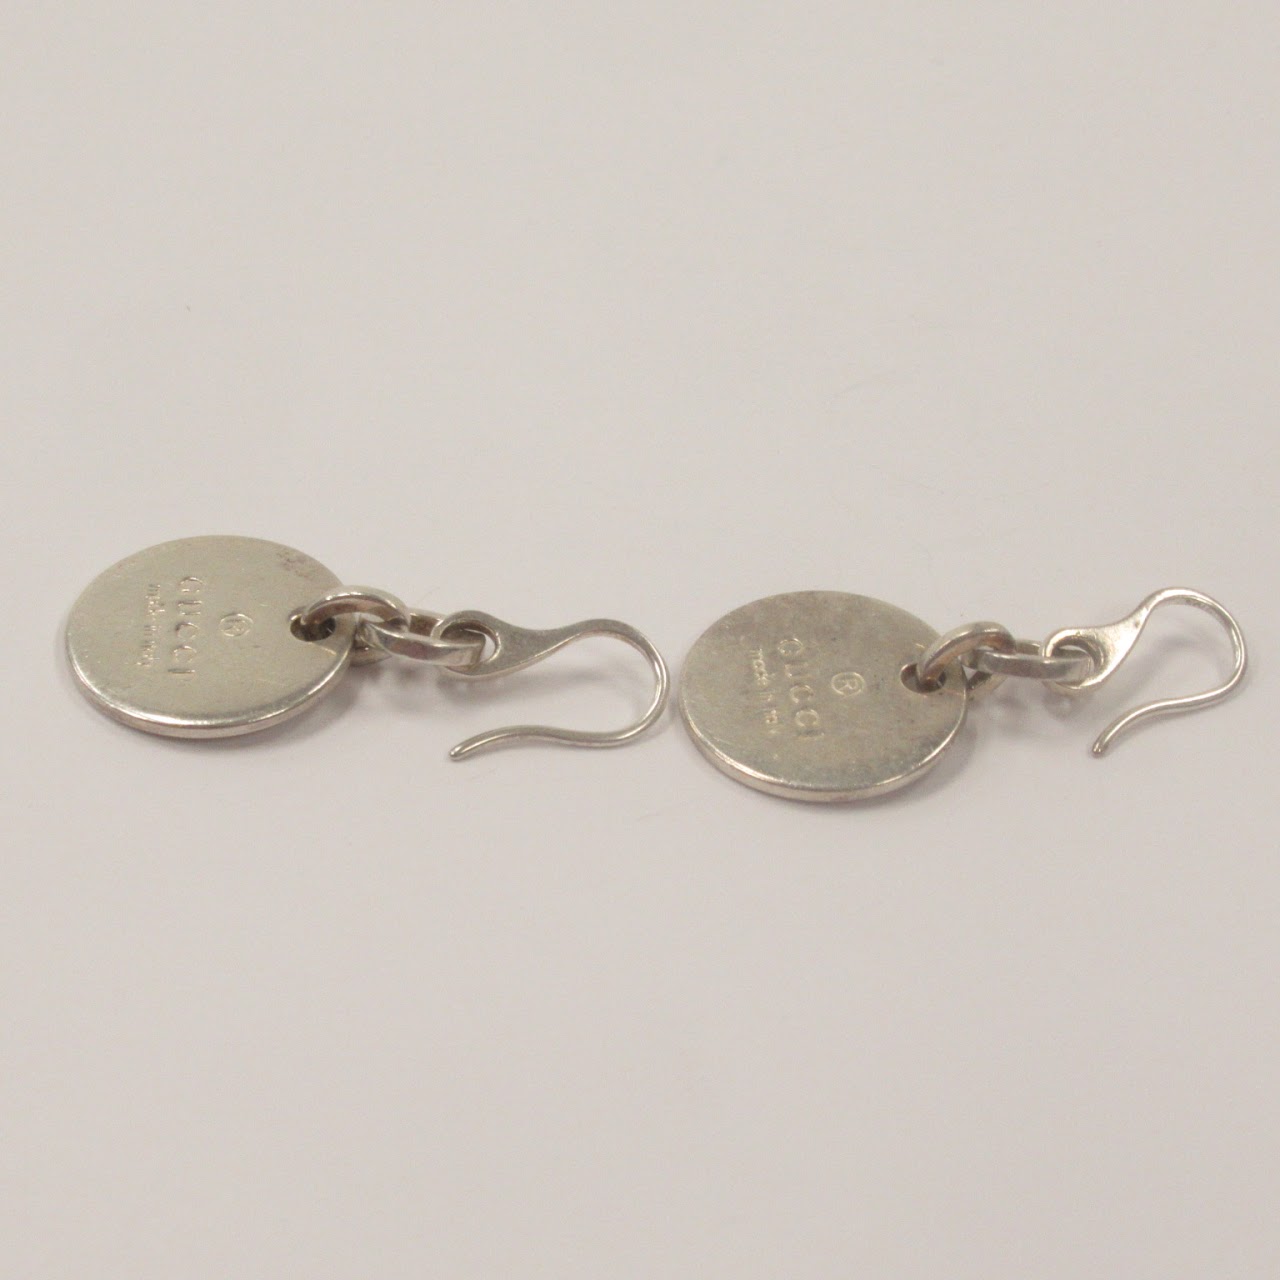 Gucci Sterling Silver Tag Earrings